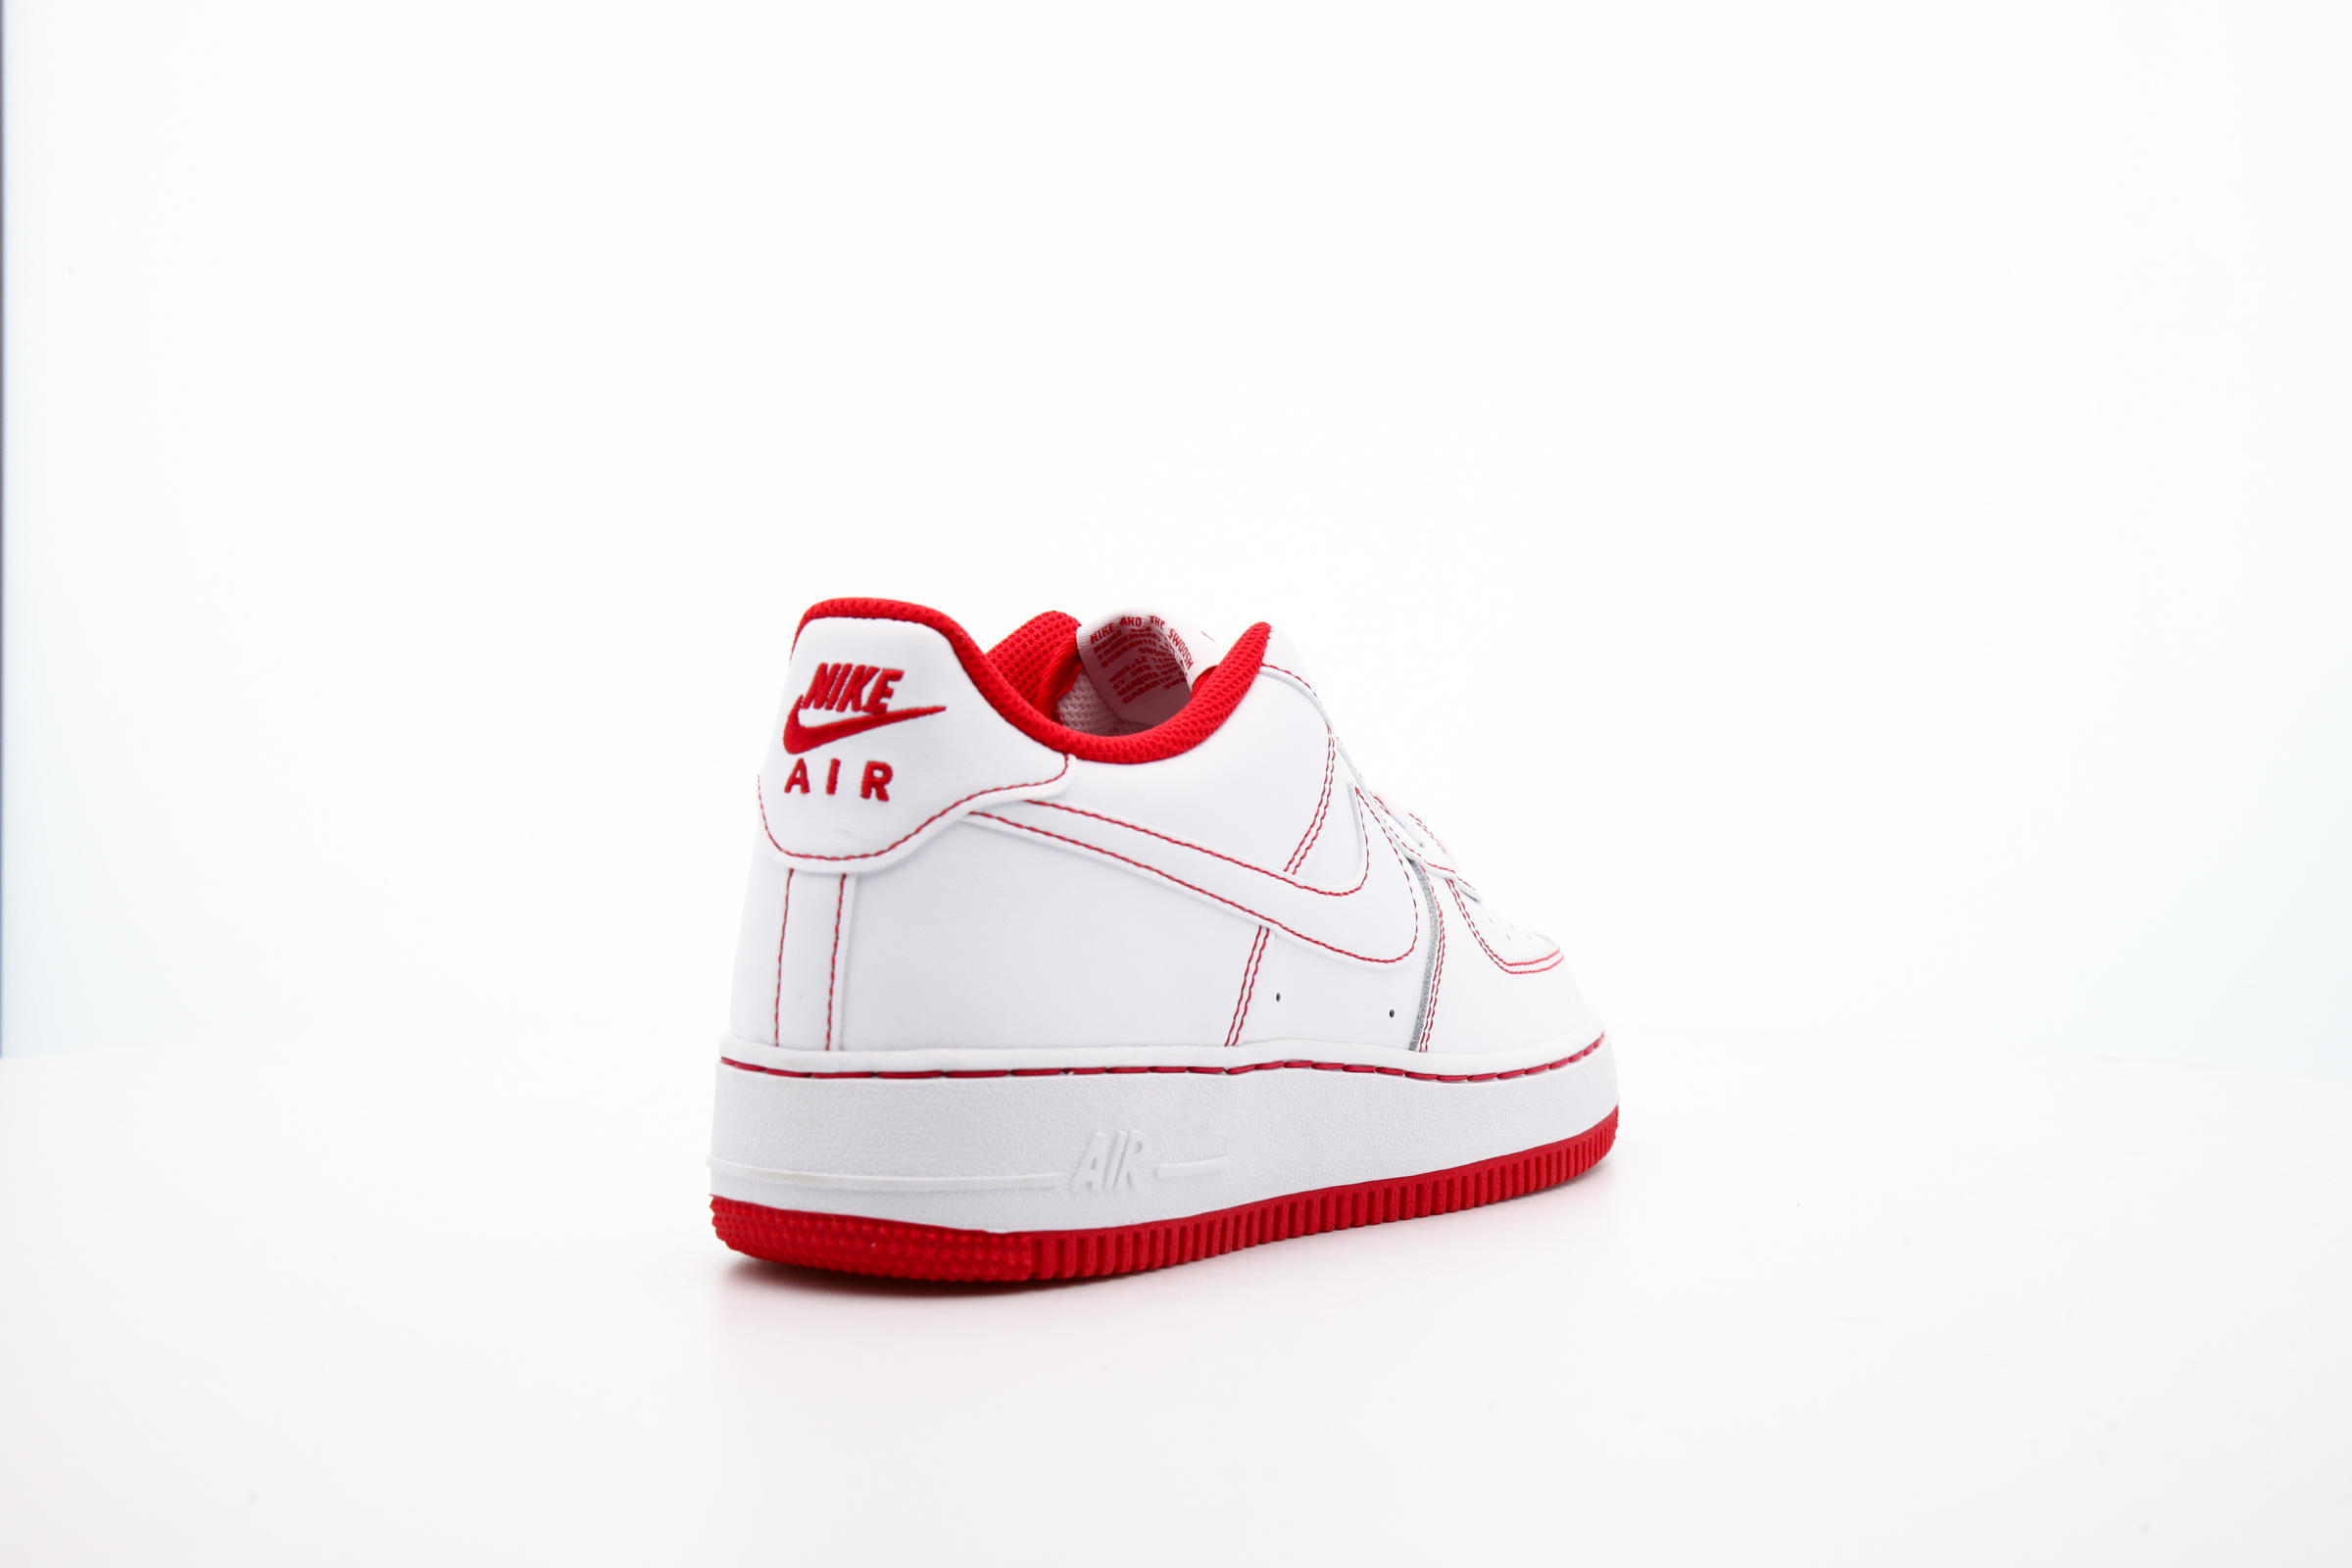 Nike AIR FORCE 1 (GS) "RED"